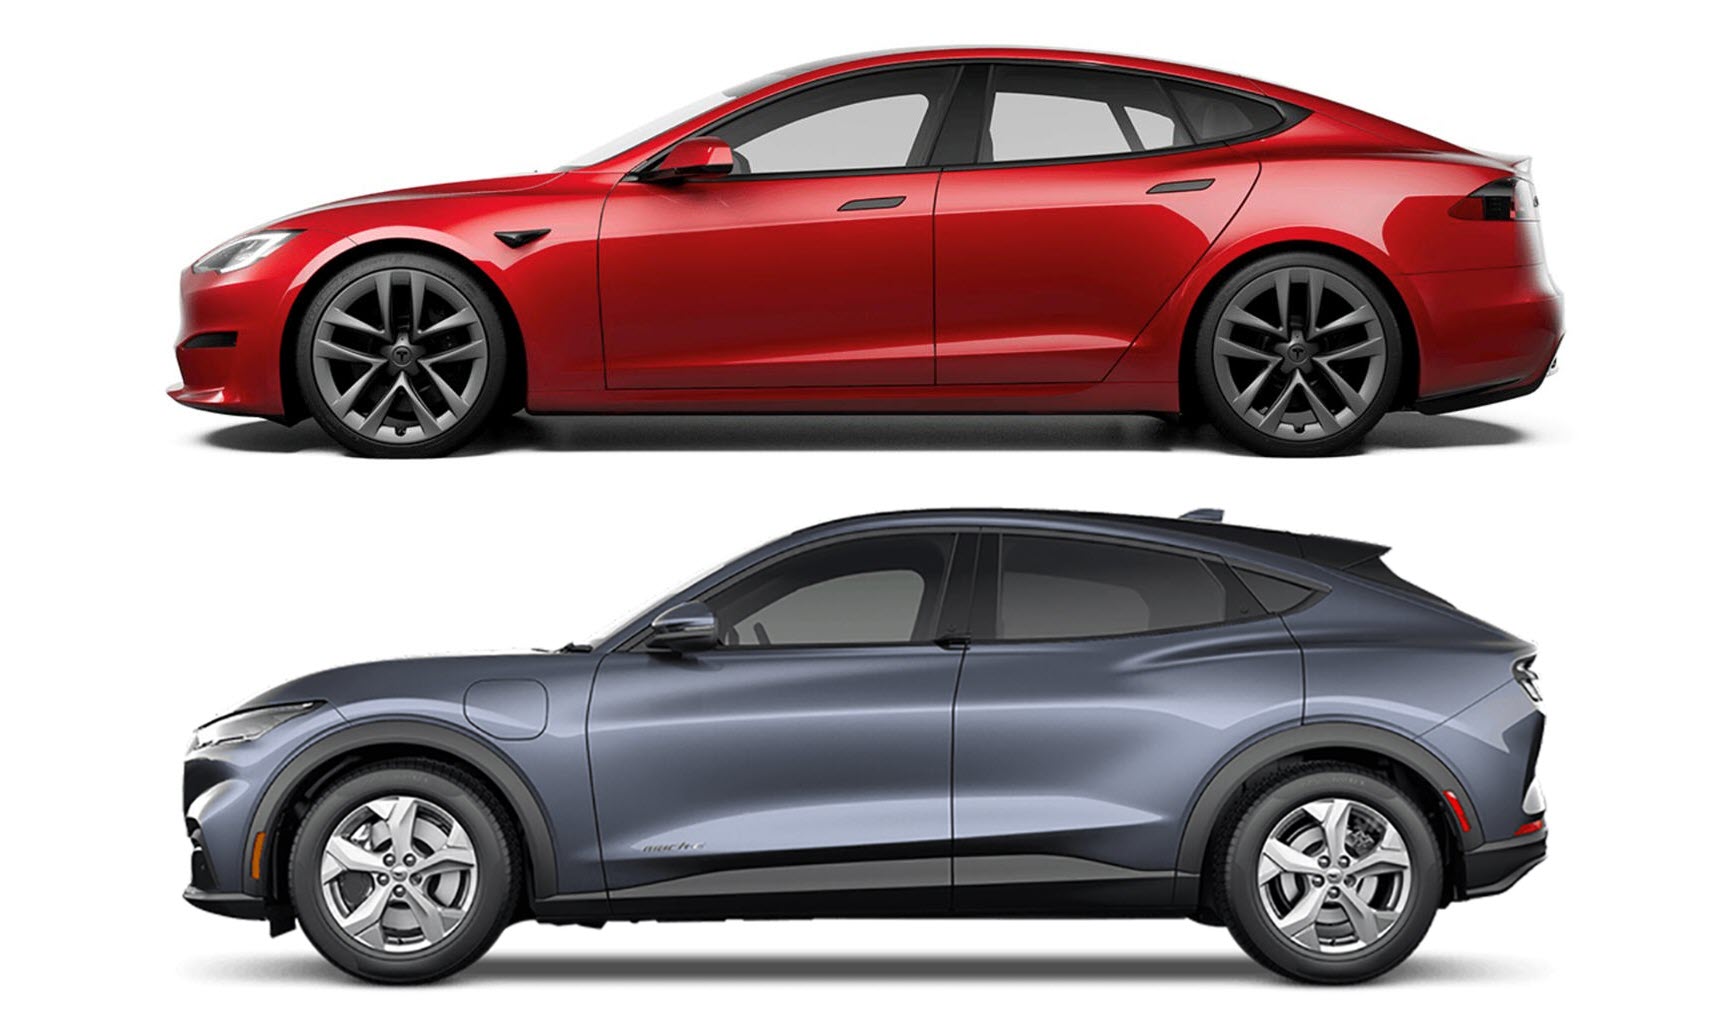 Tesla Model S easily outsells Ford Mustang Mach-E as Tesla dominates Q1 2022 EV registrations in the US